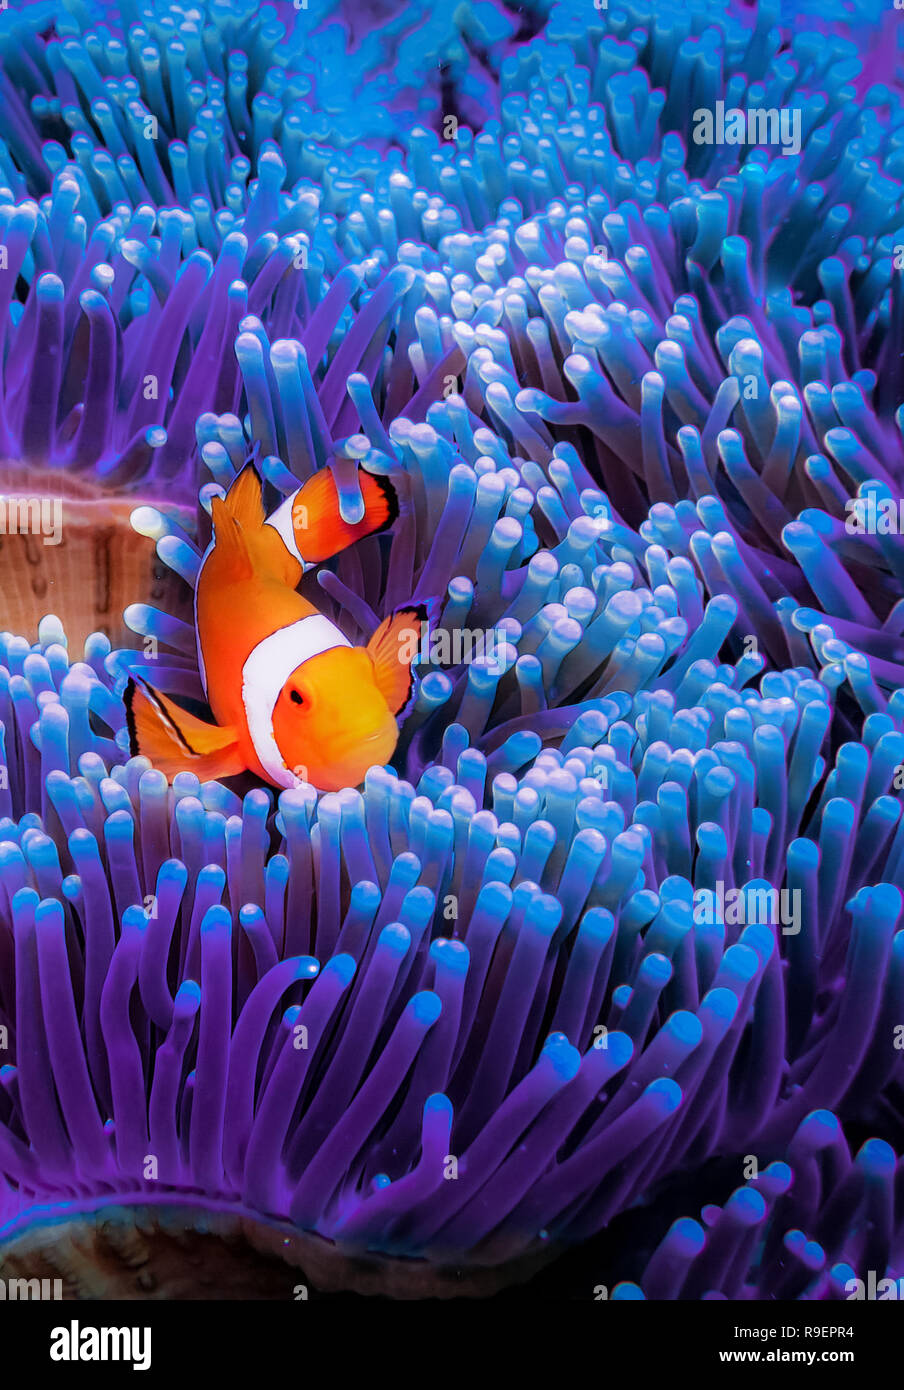 A beautiful and friendly clown fish in a striking blue-purple anemone, looking at the camera. Stock Photo